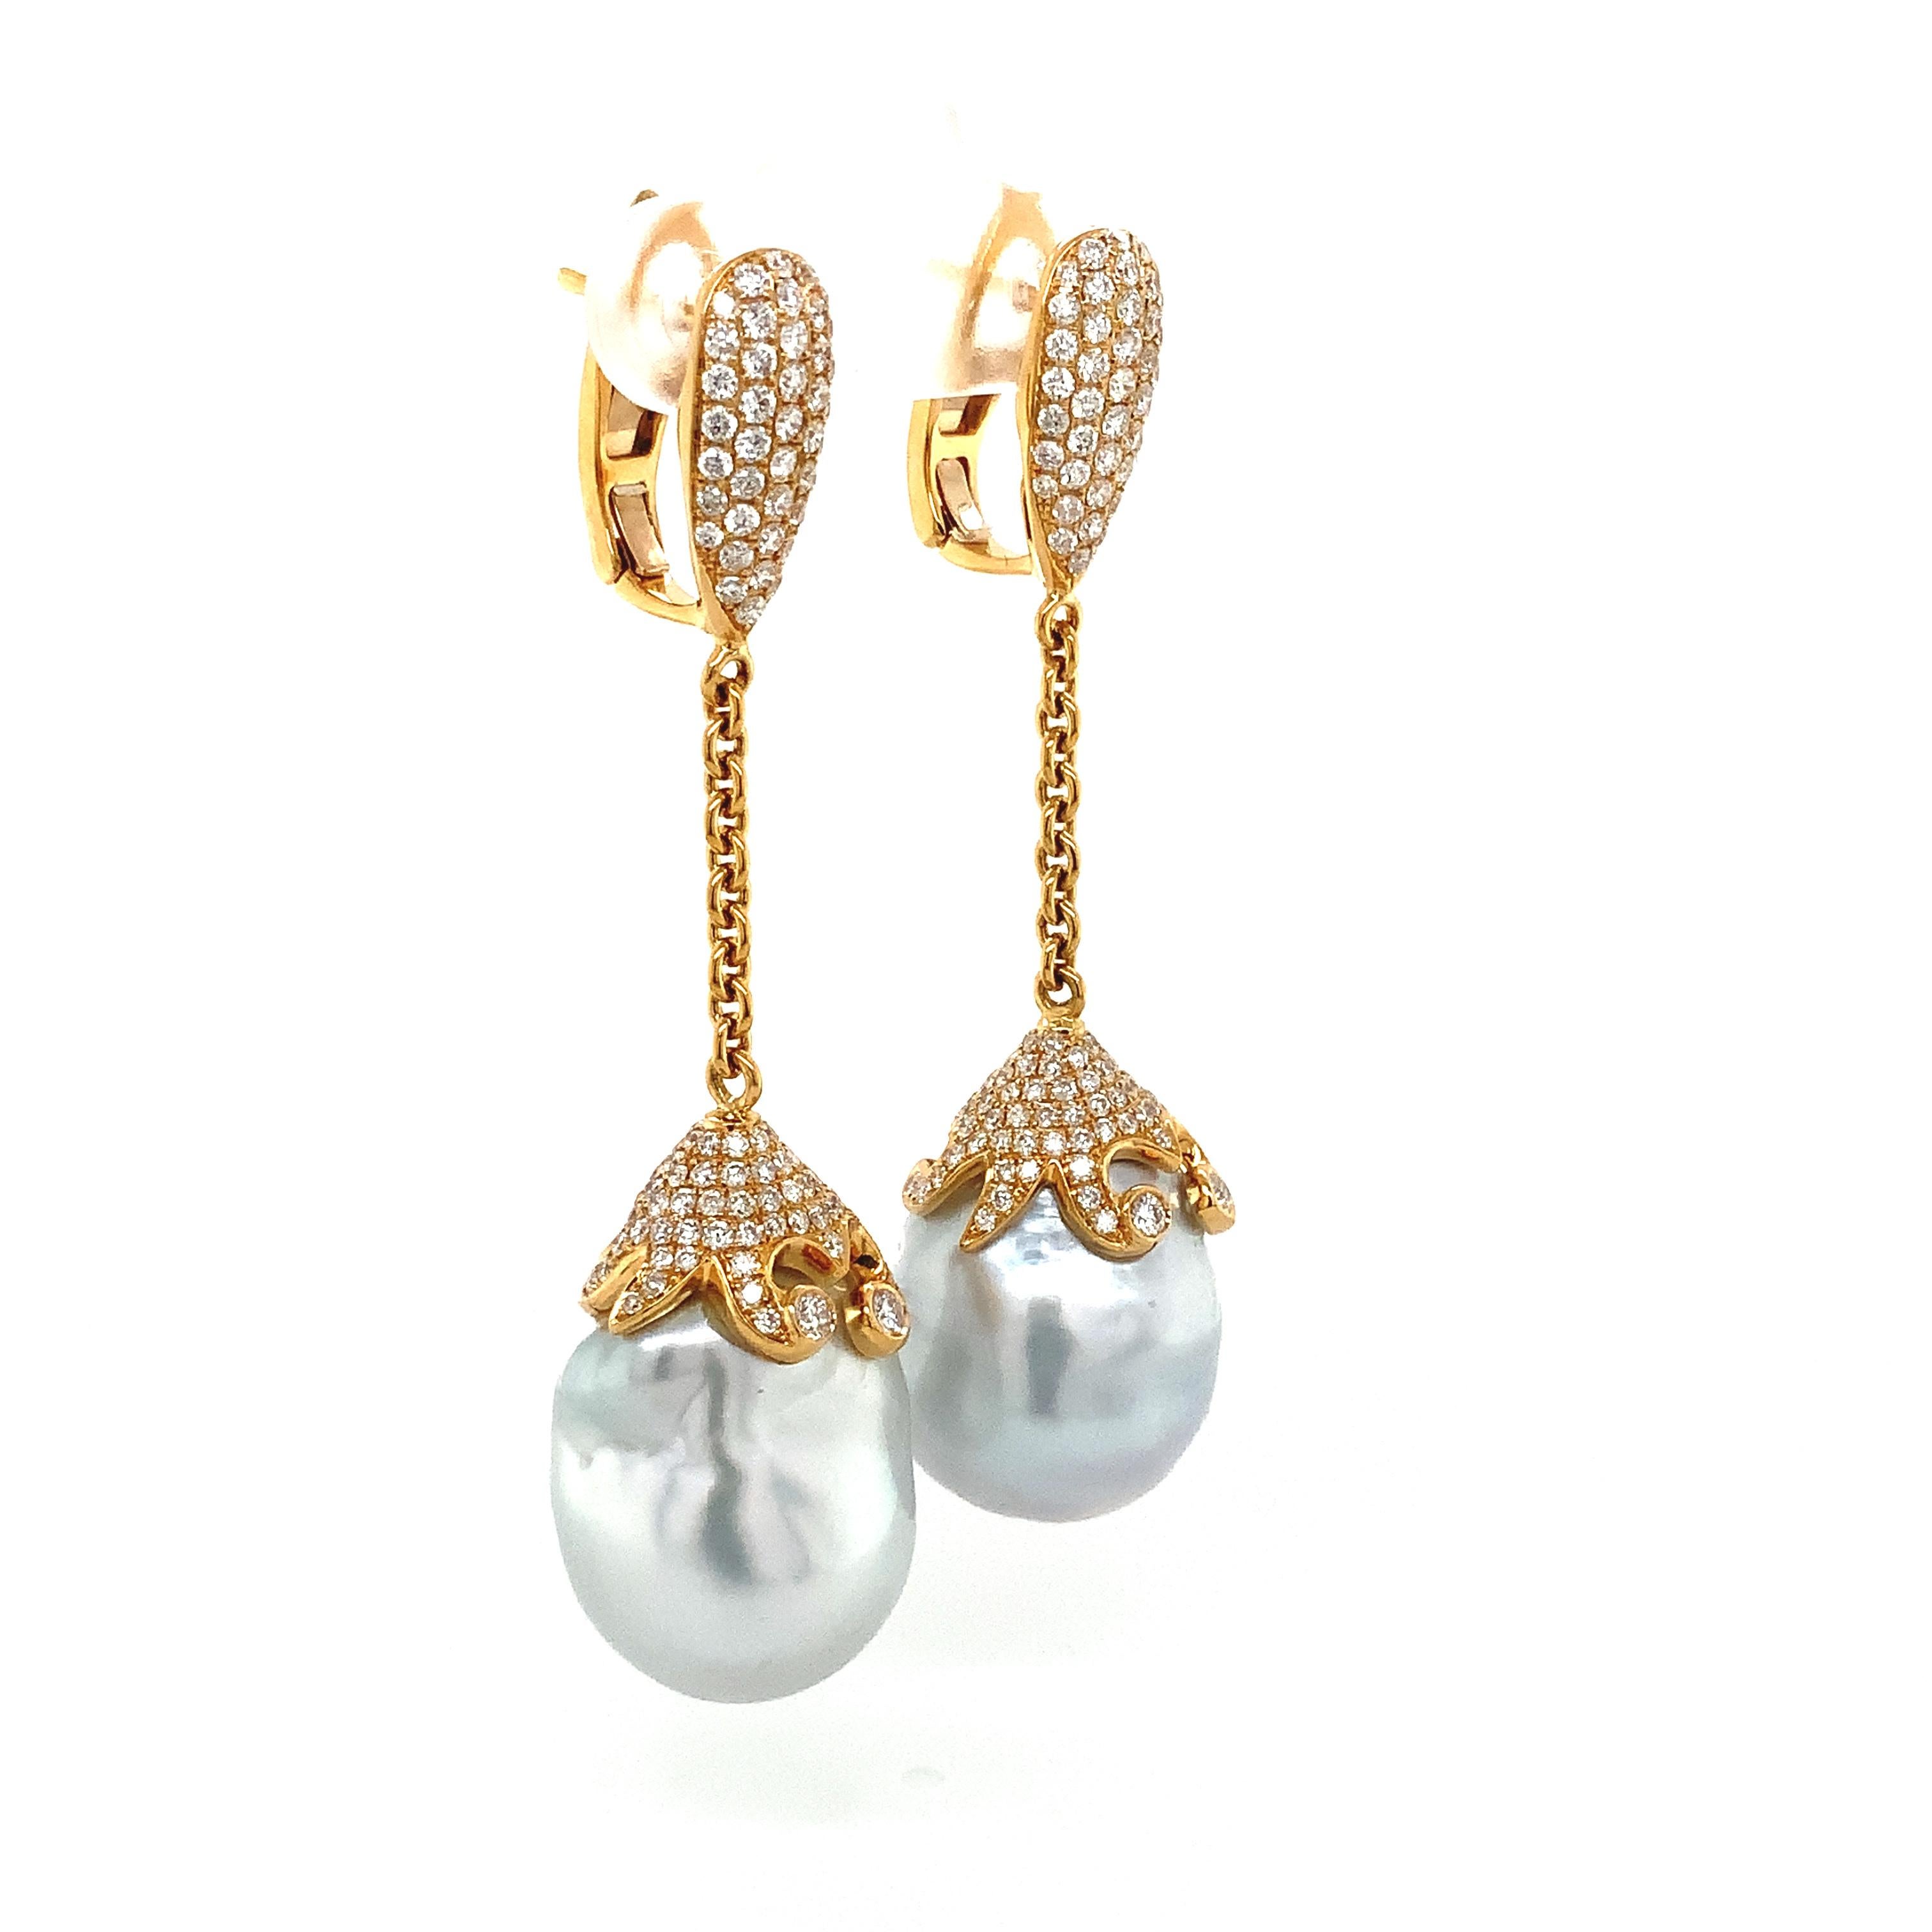 ASBA Collection White South Sea Baroque Pearl and Pavé Diamond Set 18Kt Yellow Gold Earrings. These exquisitely Pavéd Pearl caps reflect the nature of the Sea, representing life from where they were cultivated. These earrings are very elegant and